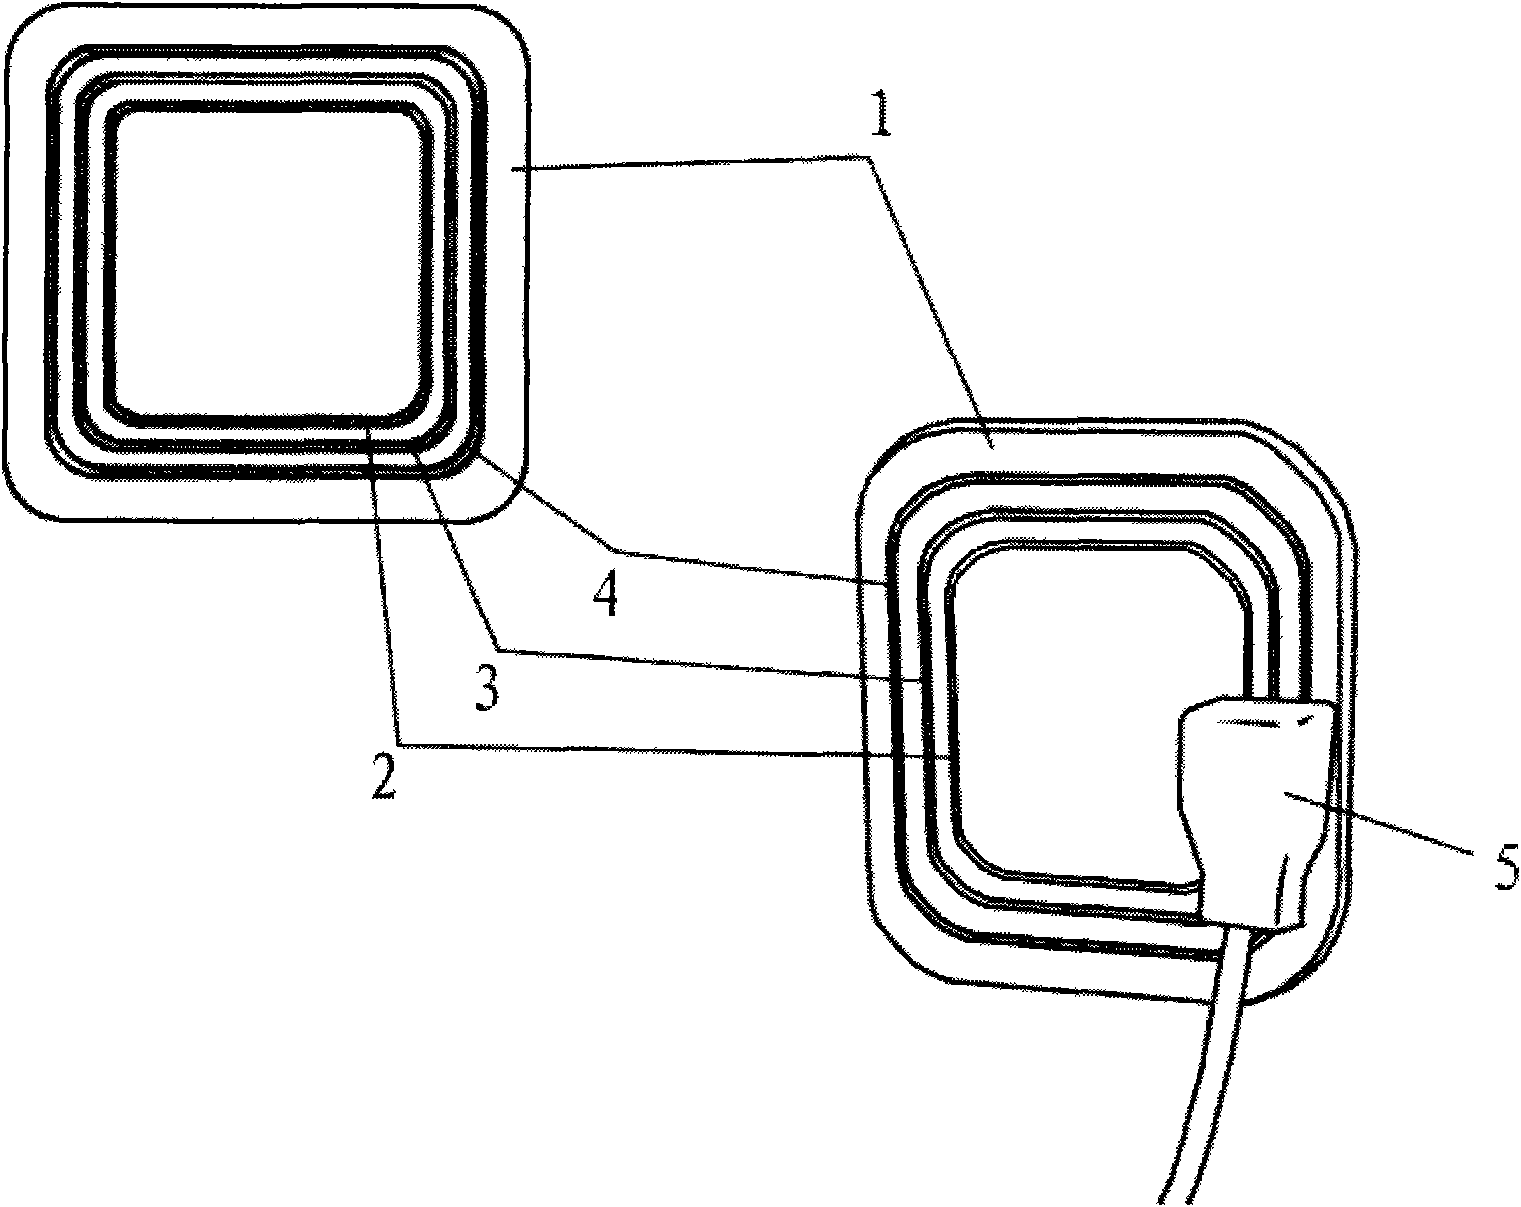 Socket with linear slots